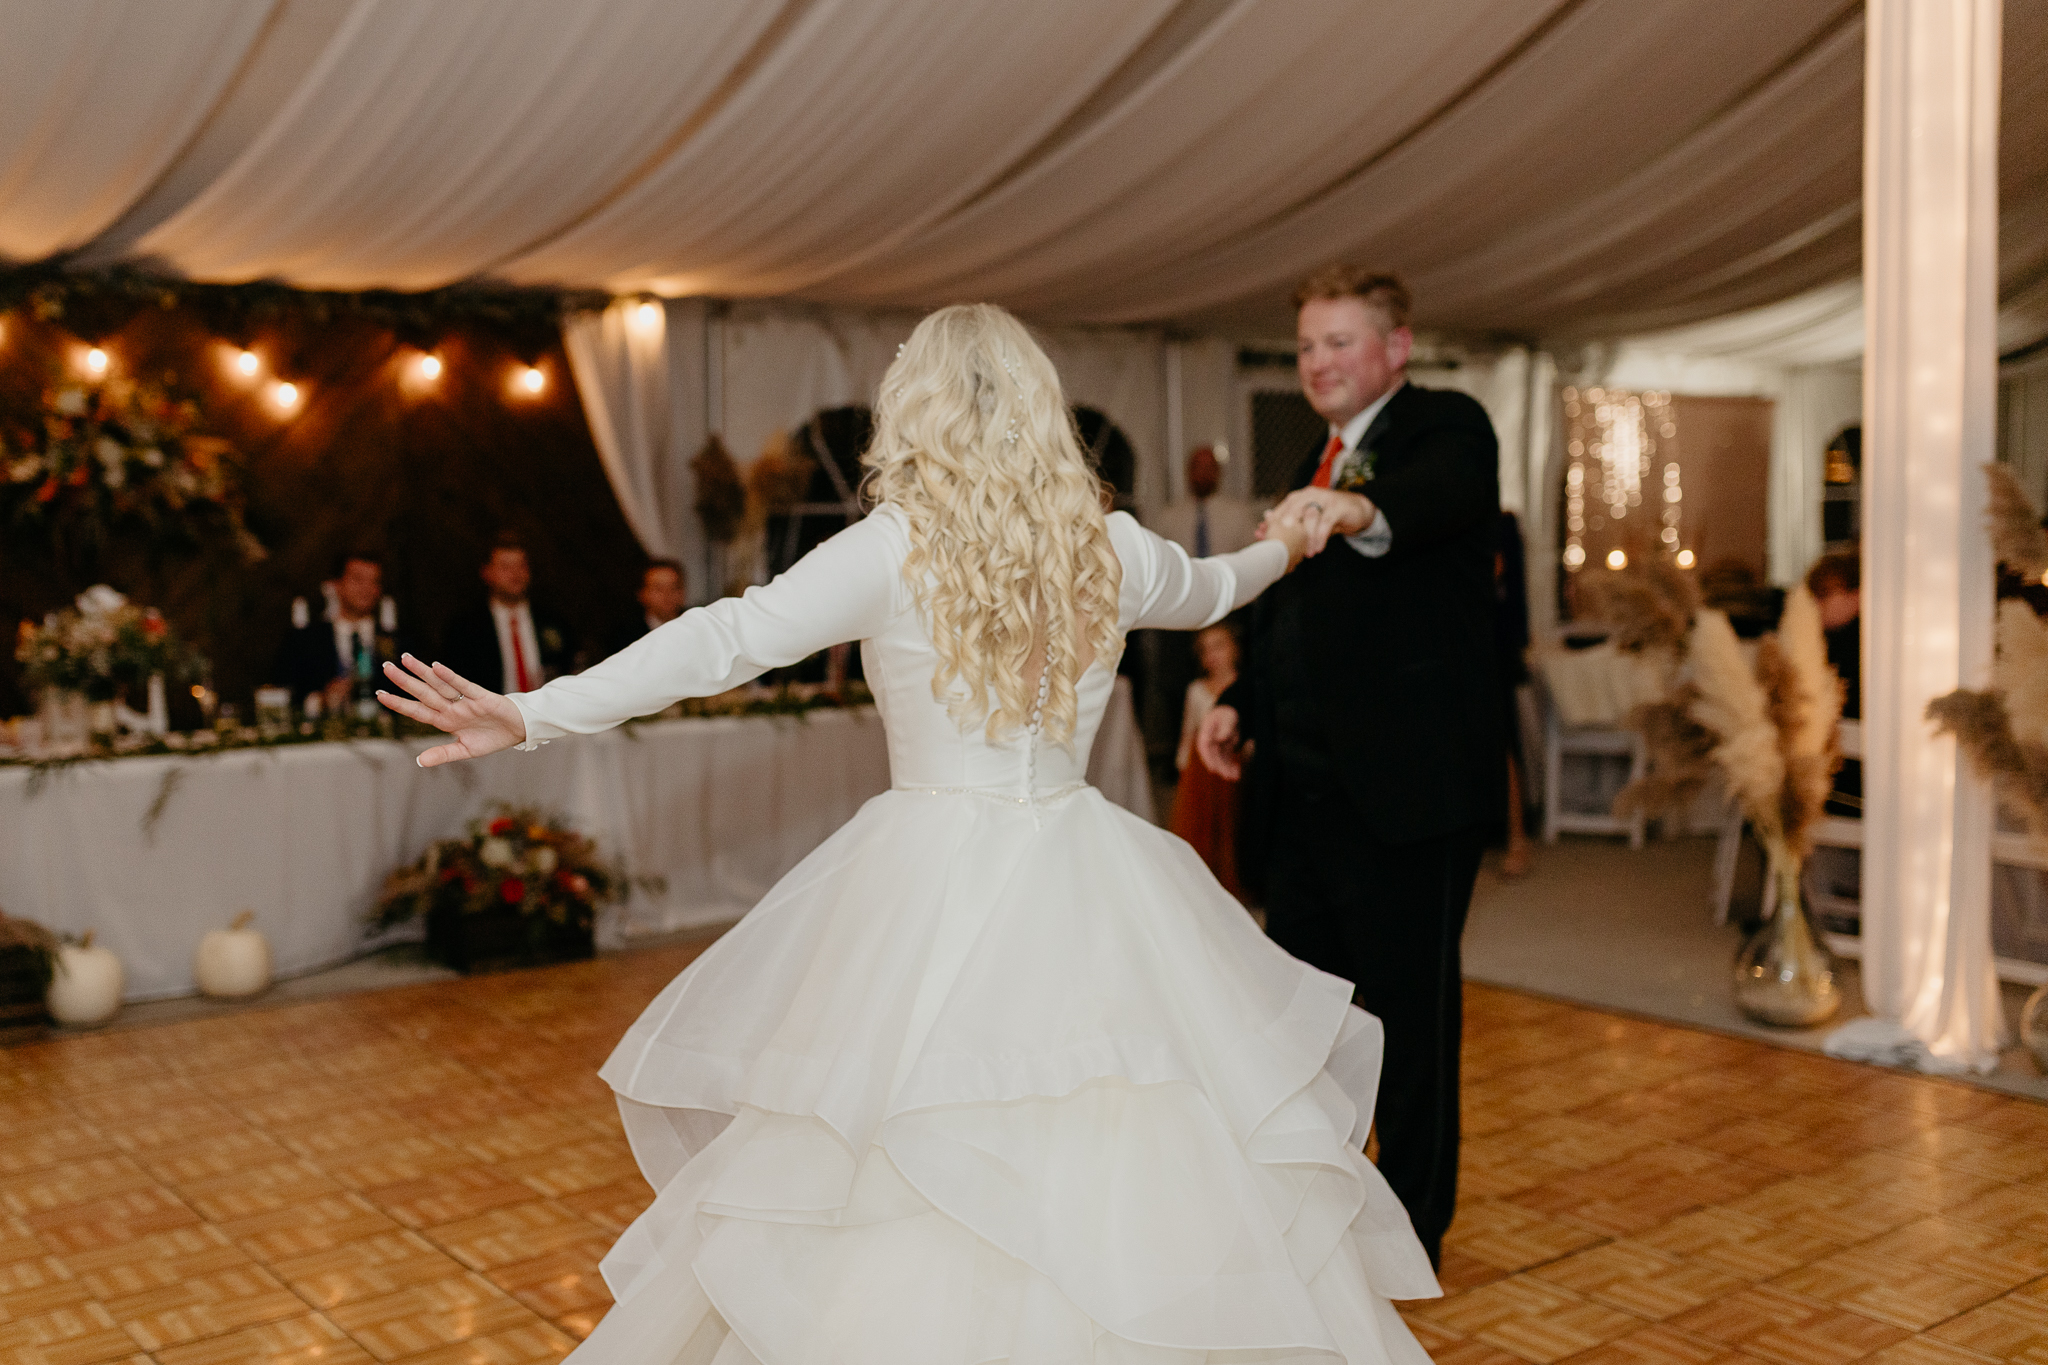 Bride dances with her father on the dancefloor in a white tent wedding